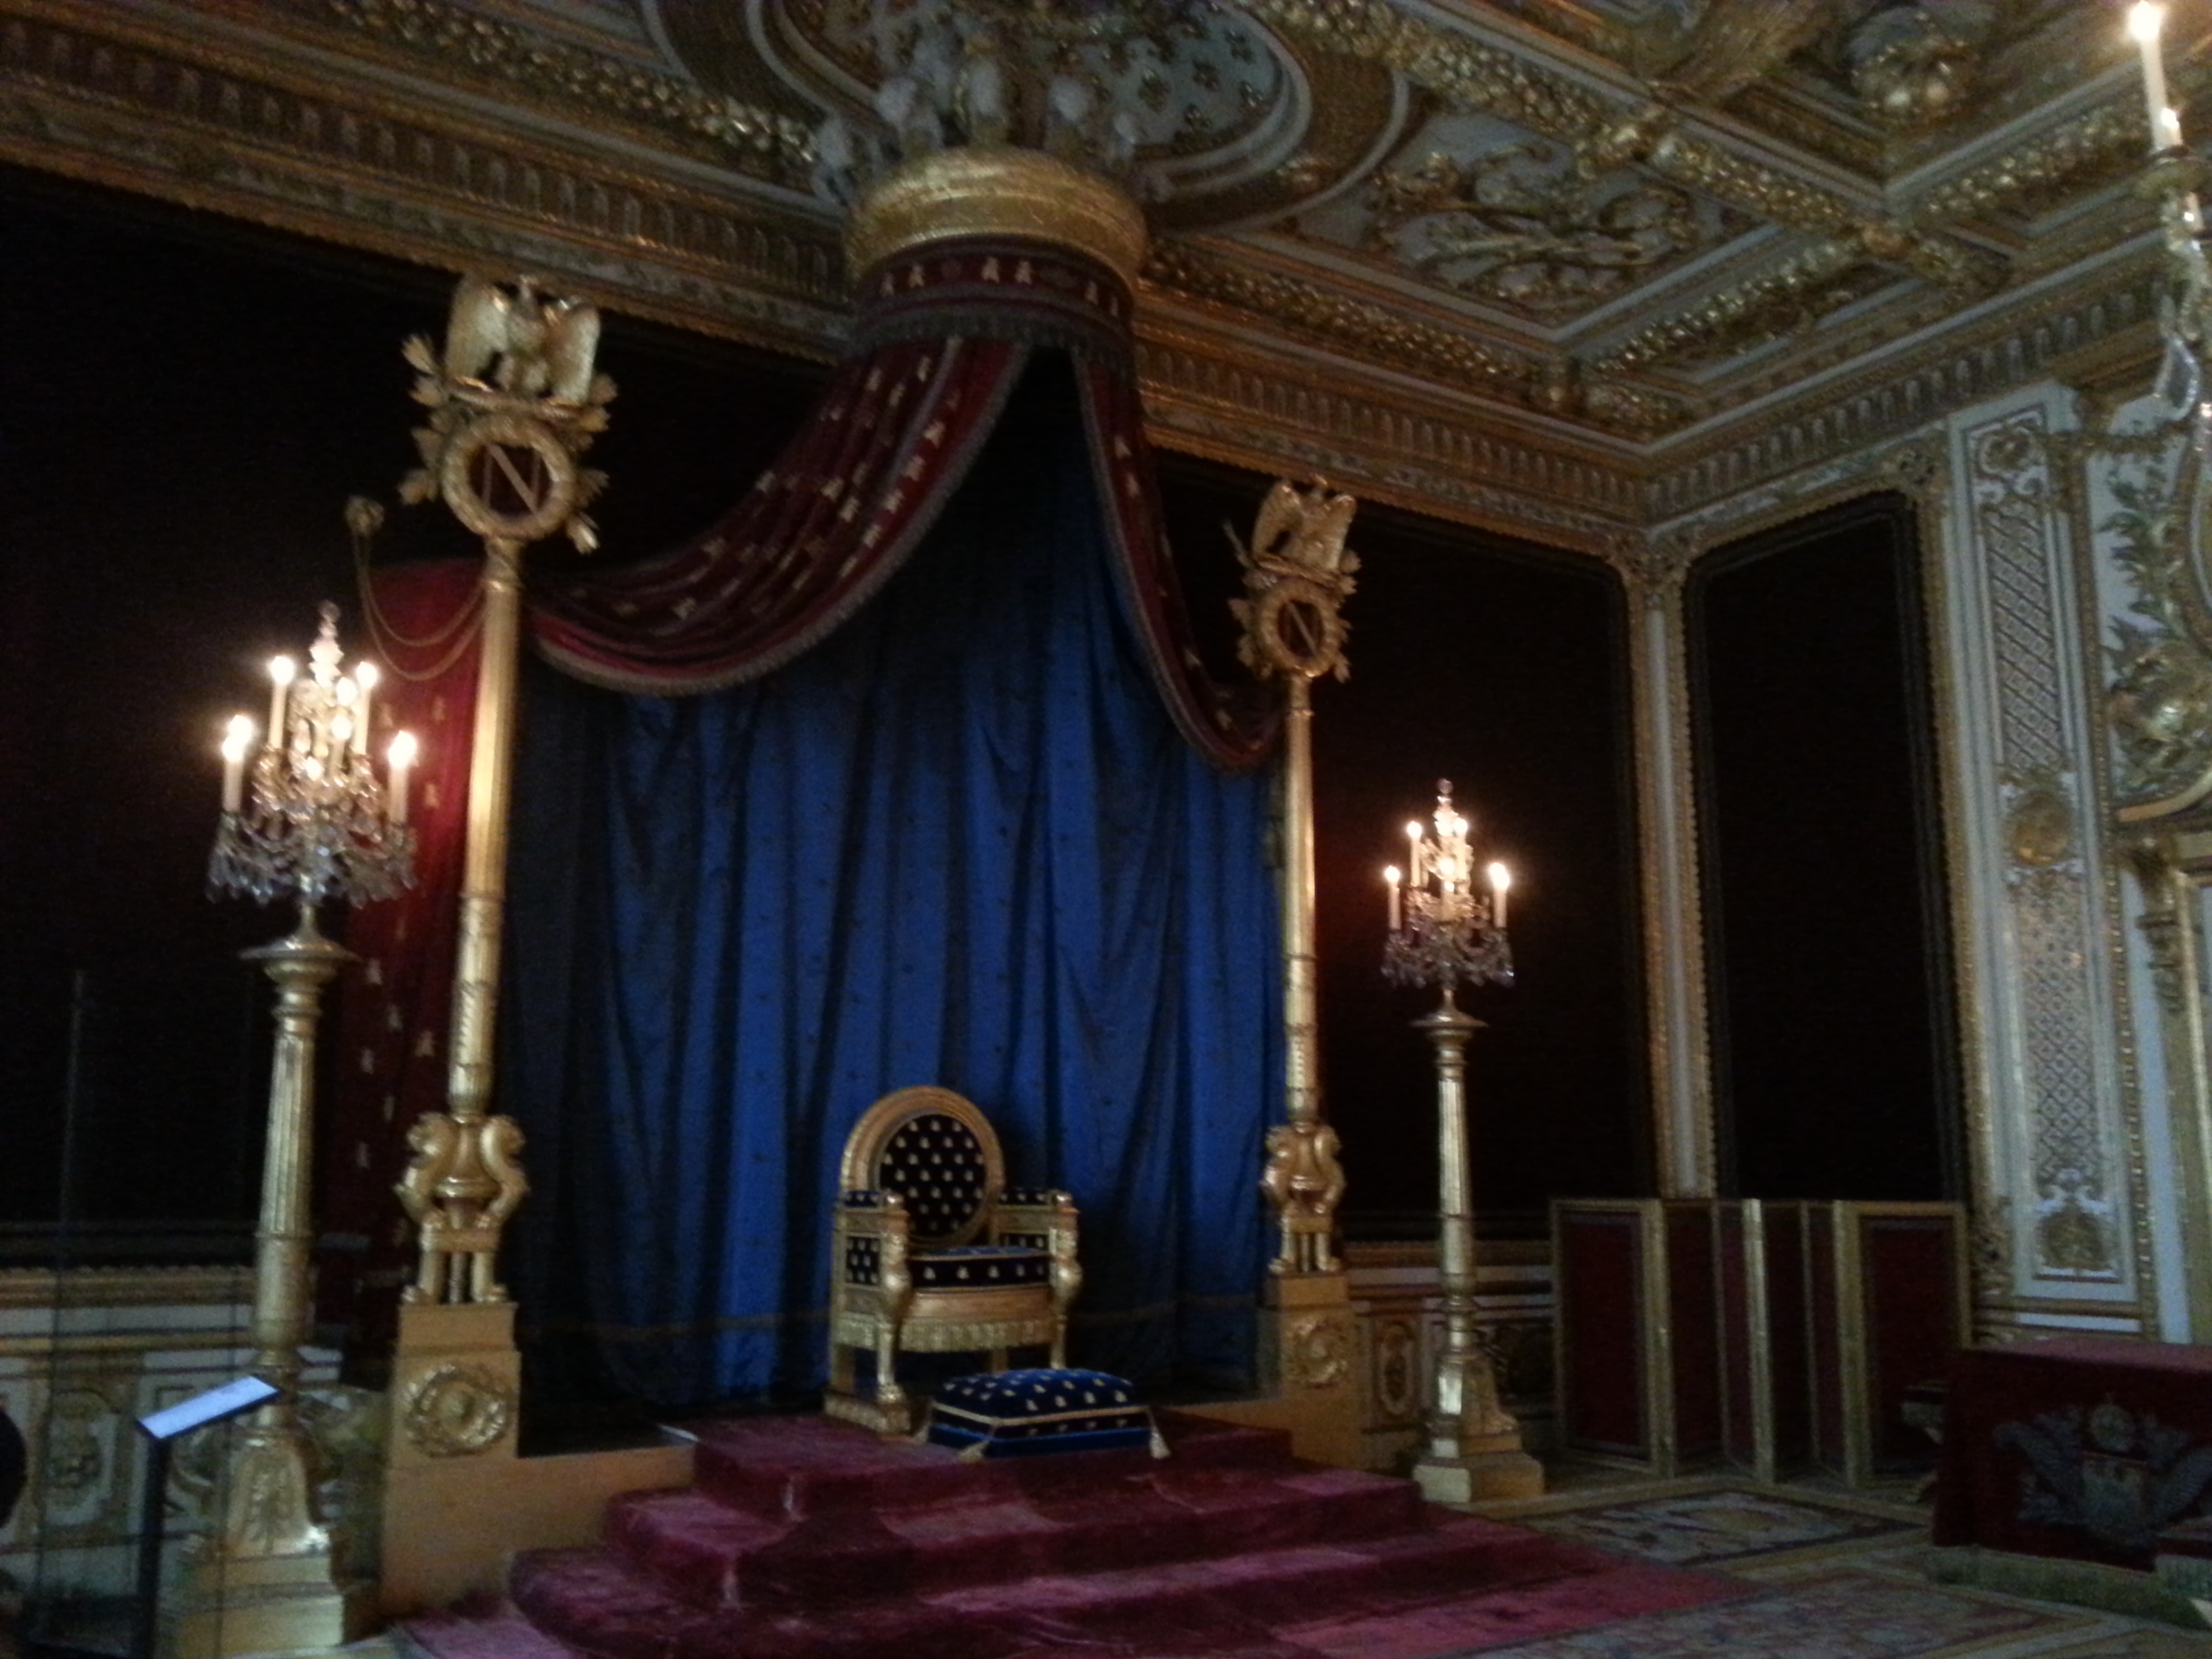 Throne room of Napoleon I, palace of Fontainebleau, France